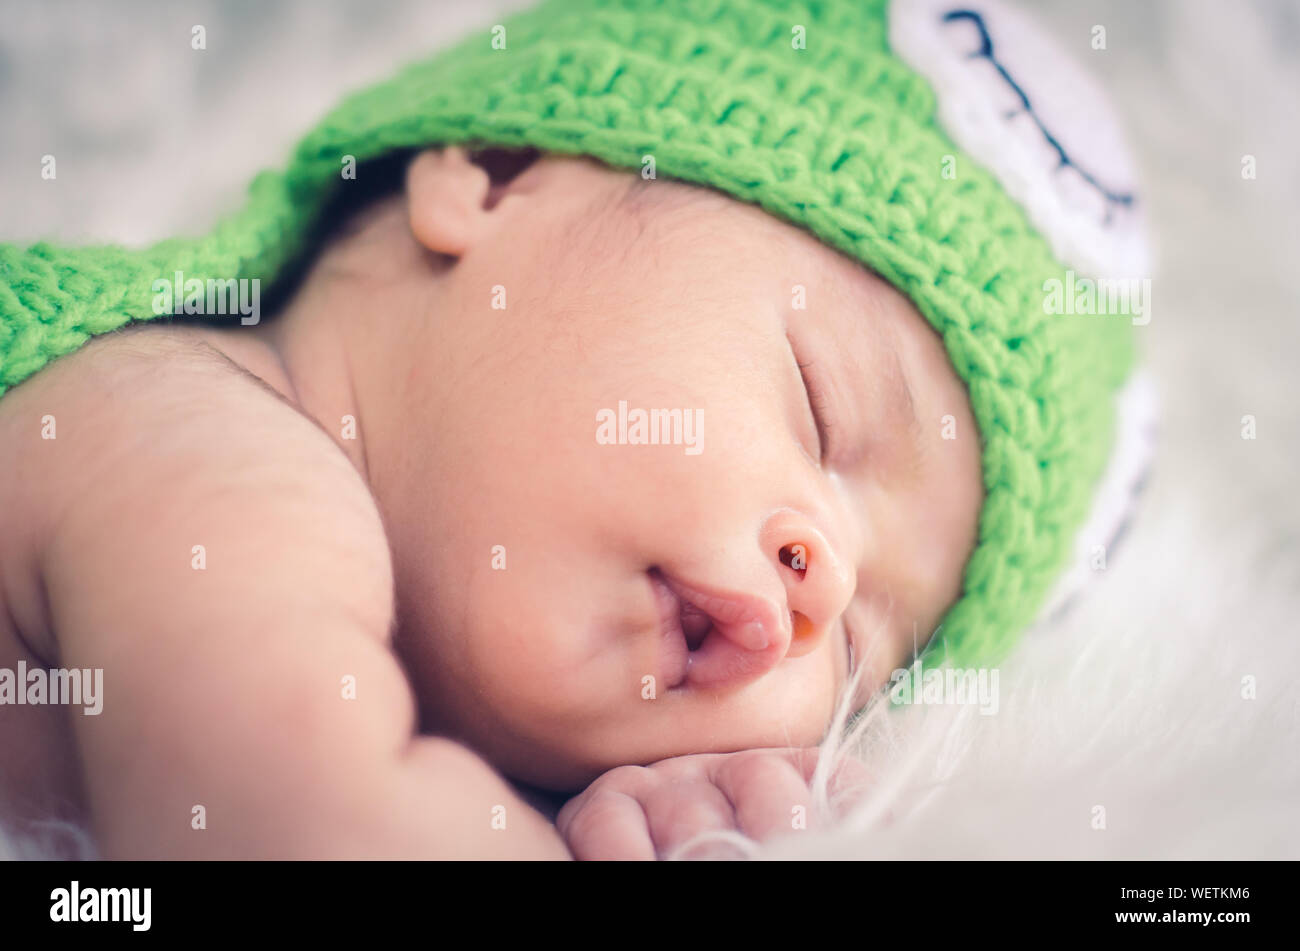 Close-up Of Cute Baby In Green Costume Sleeping On Fur Carpet Stock Photo